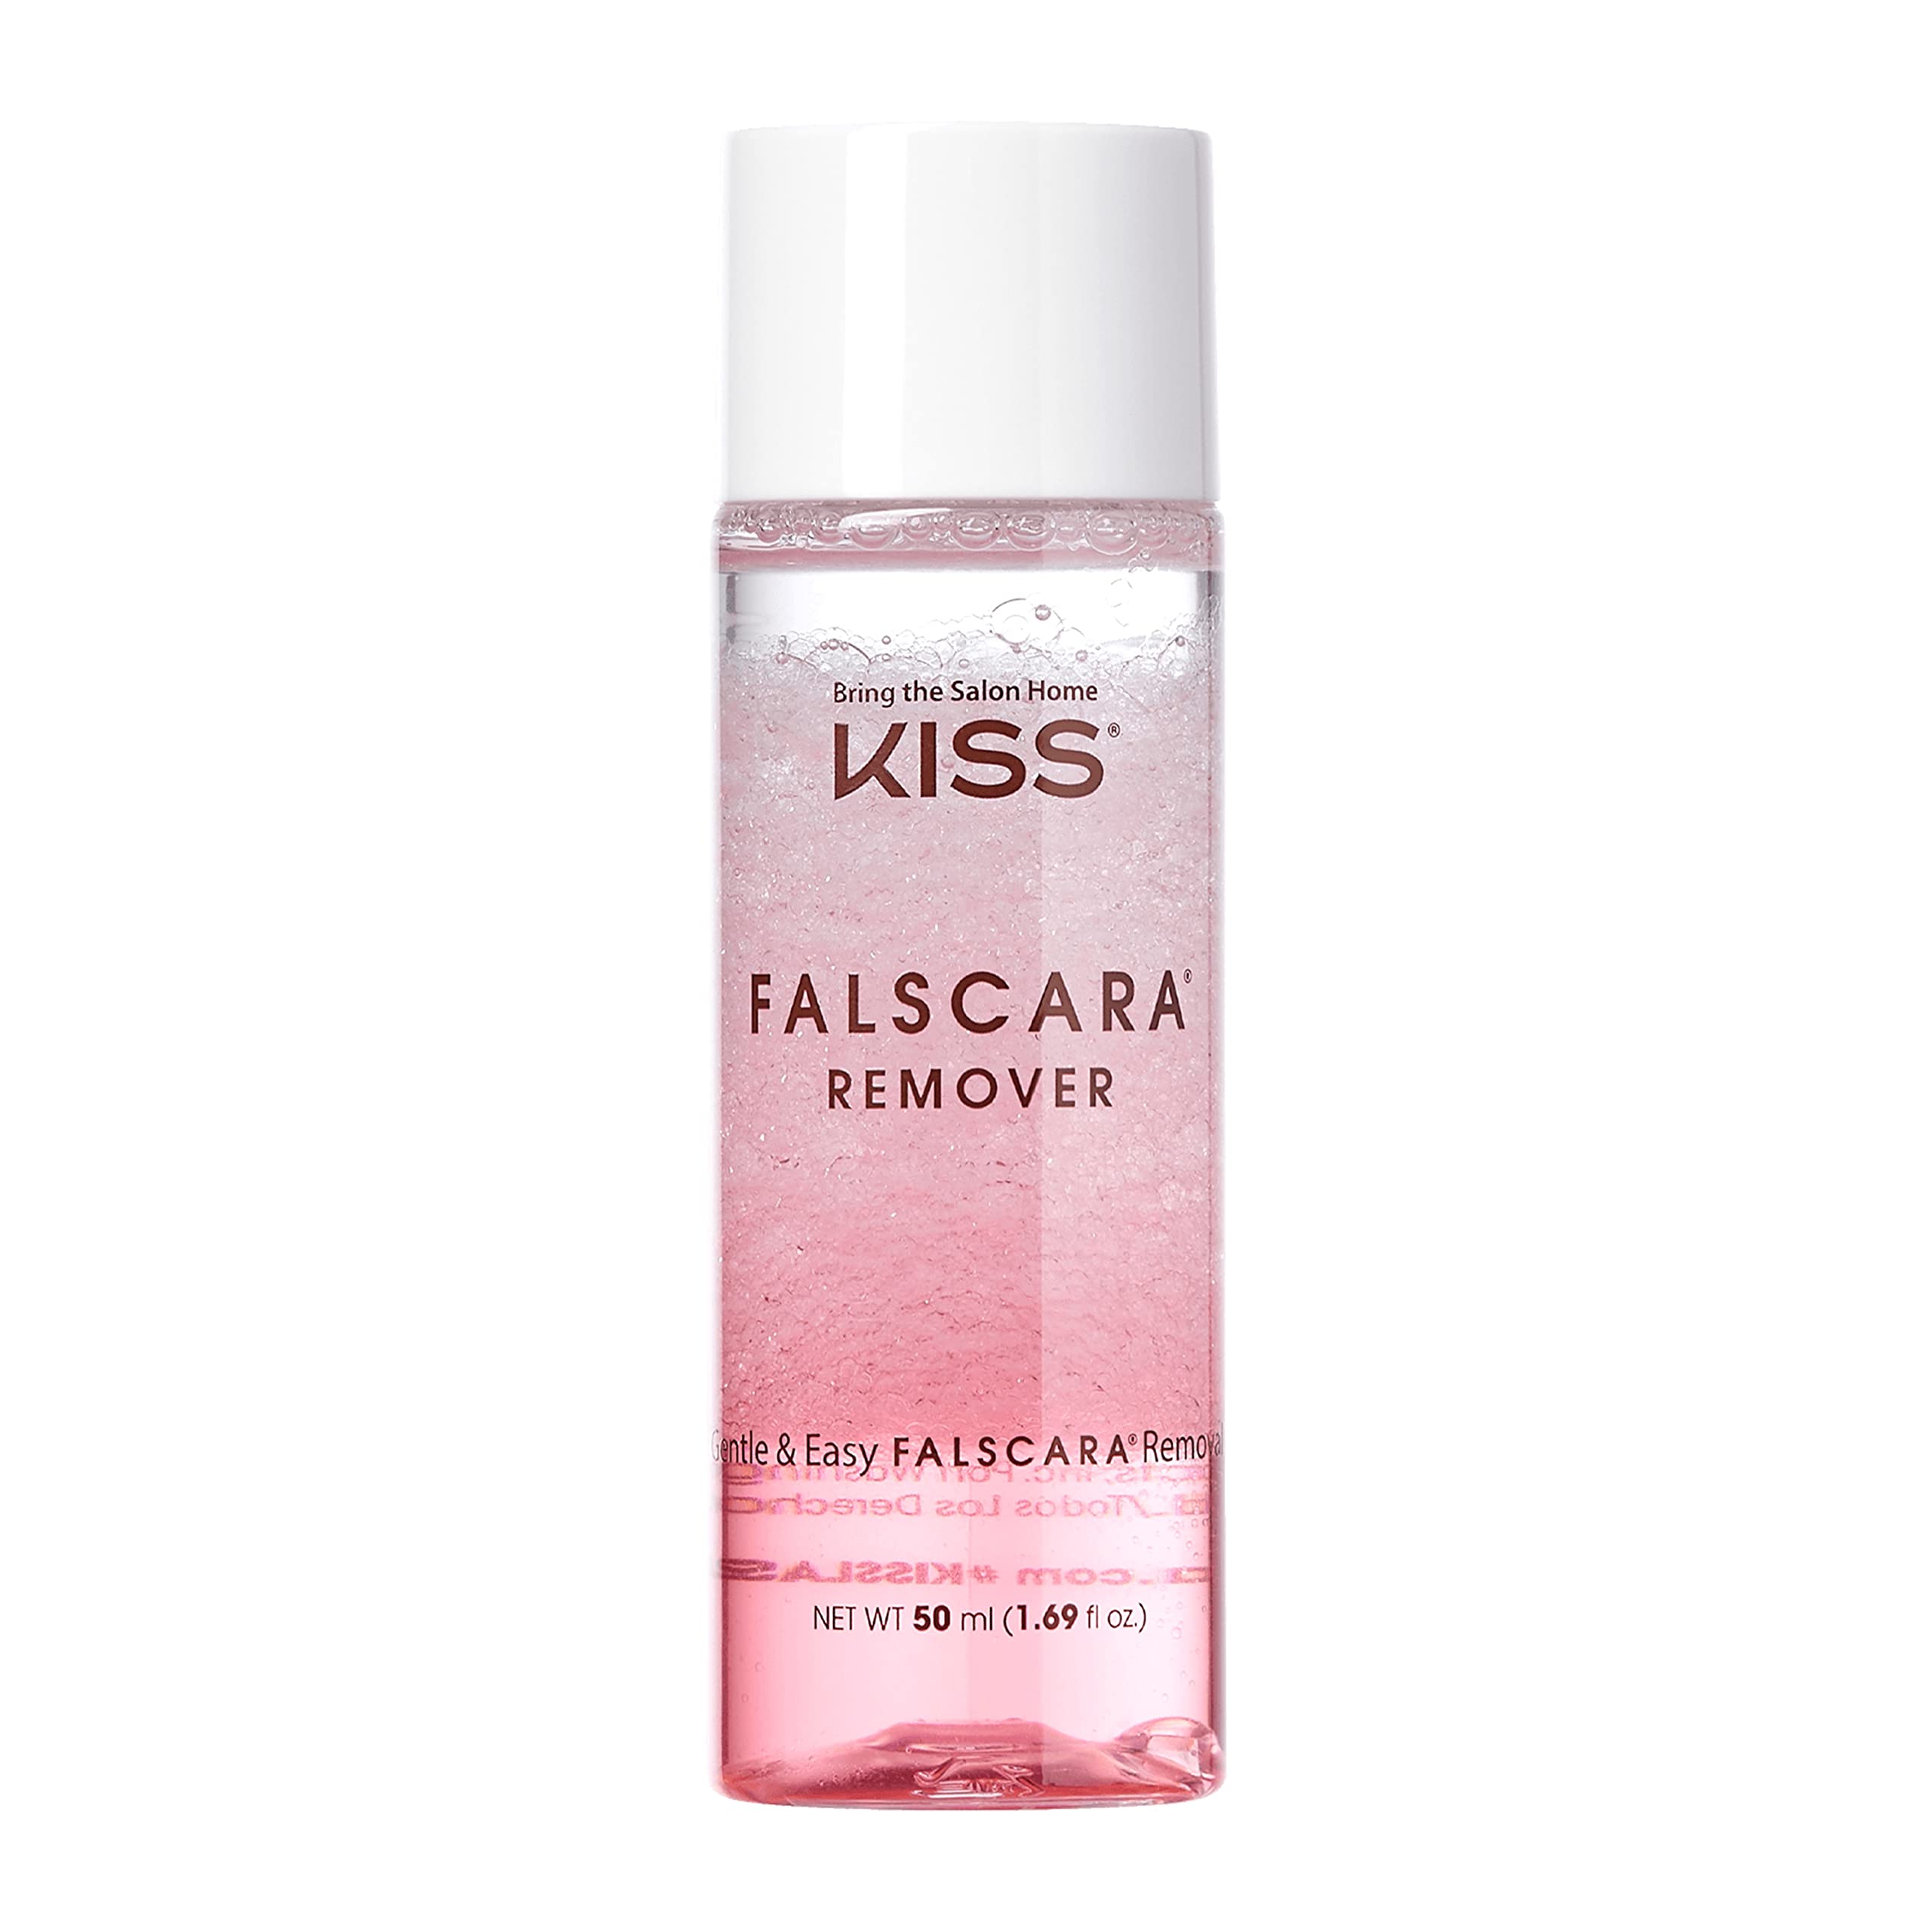 KISS Falscara DIY Eyelash Extension Remover with Natural Rosewater – Gentle Soothing Nourishing Eye Cleanser for Removal of Artificial False Synthetic Eyelashes, Lash Wisps, and Bond & Seal Adhesive